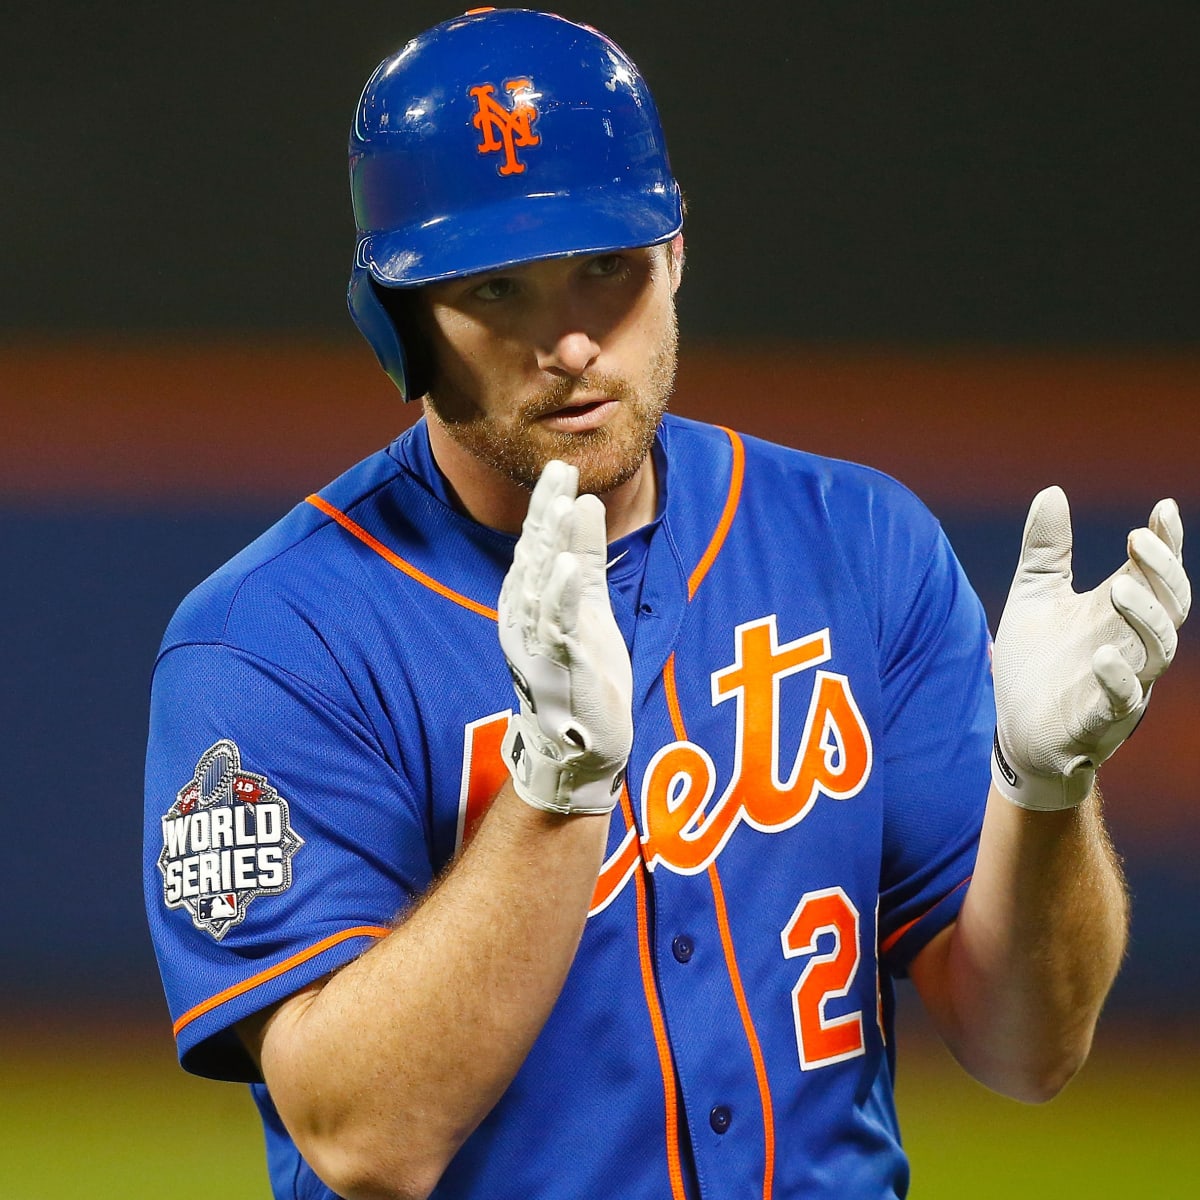 Daniel Murphy to sign with Nationals - Amazin' Avenue